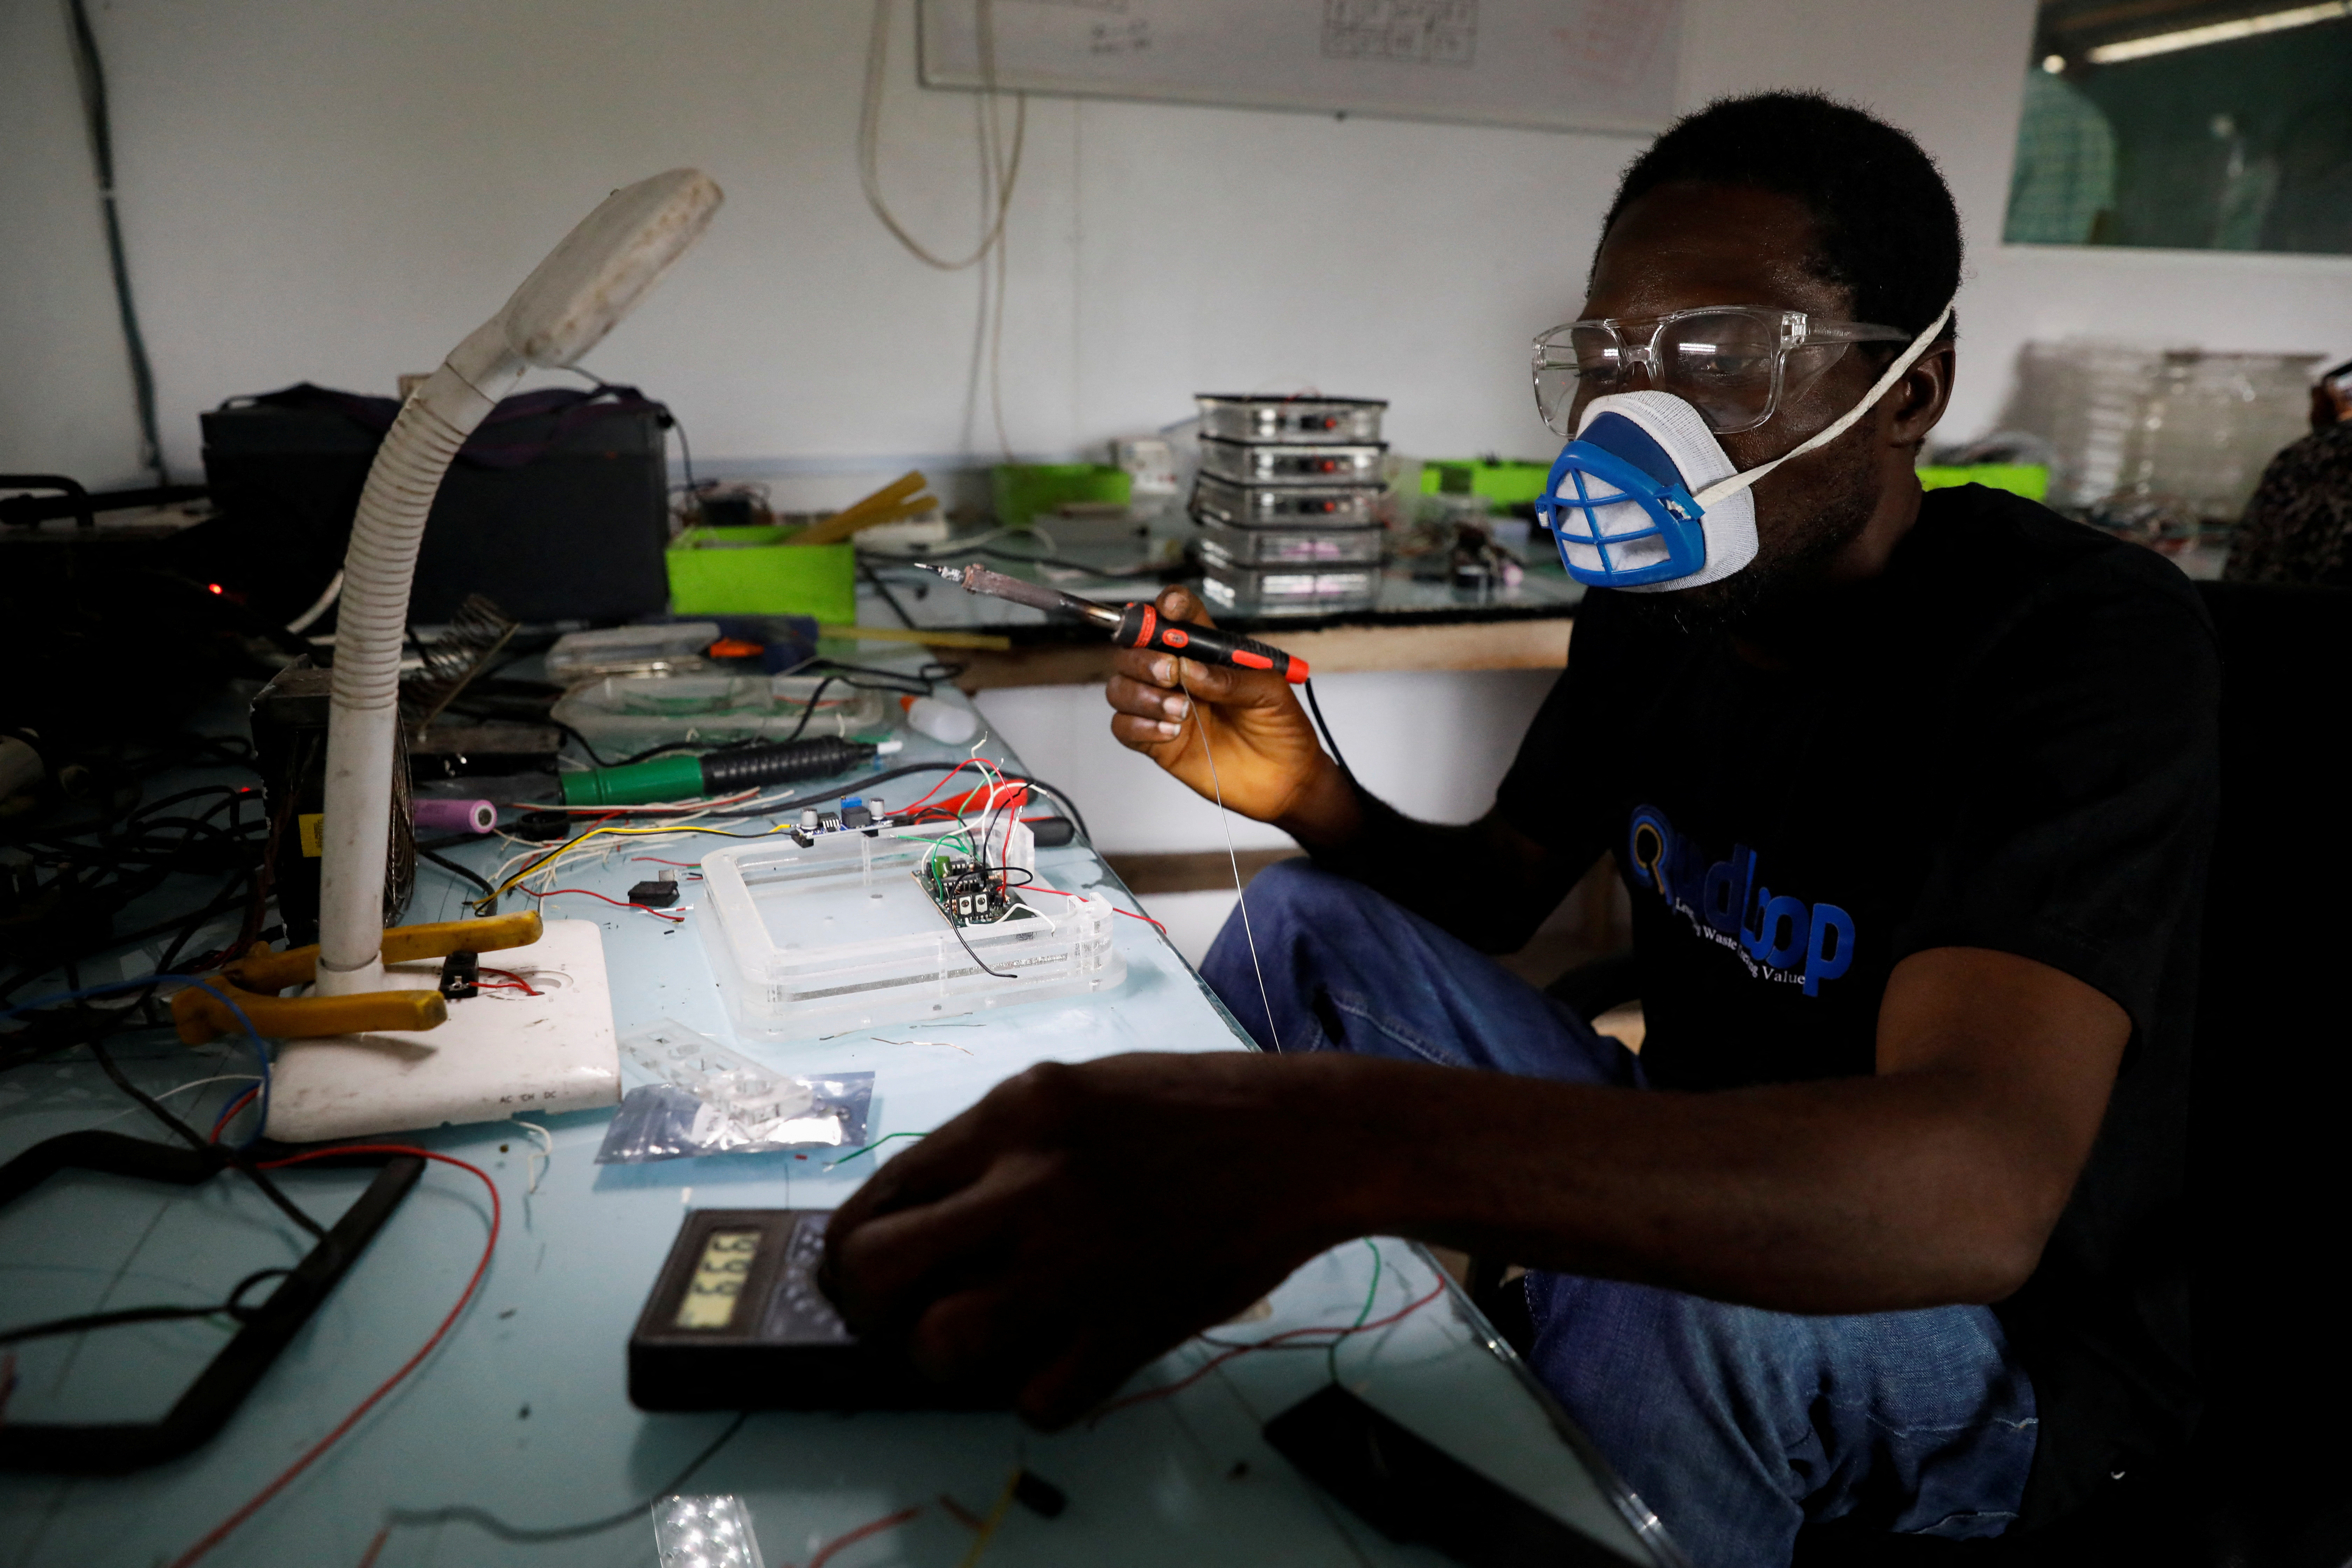 An employee works on the production of solar lanterns from recycled electronic waste at Quadloop recycling facility in Lagos